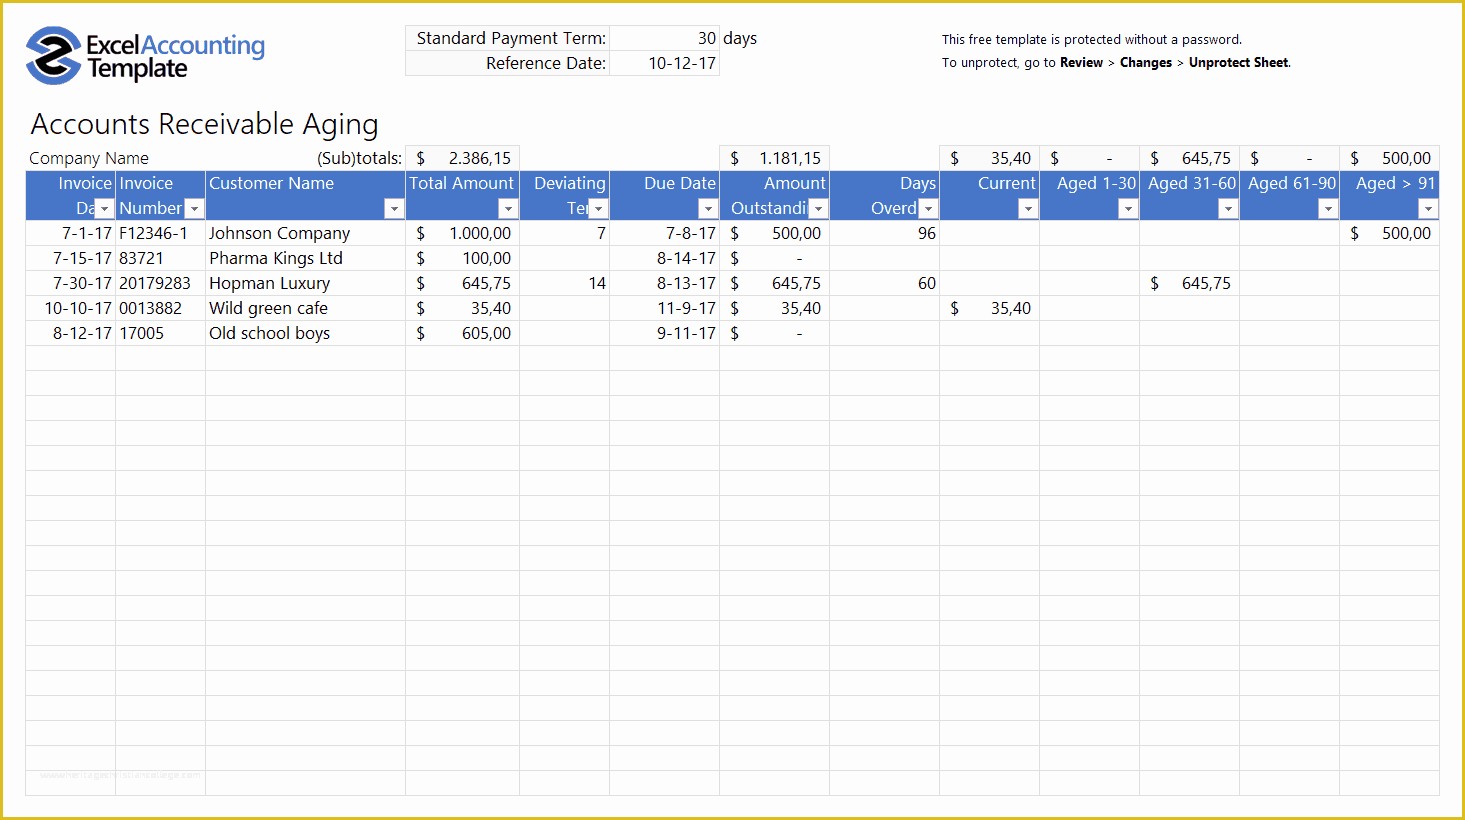 Free Accounting Templates Of Free Accounting Templates In Excel for Your